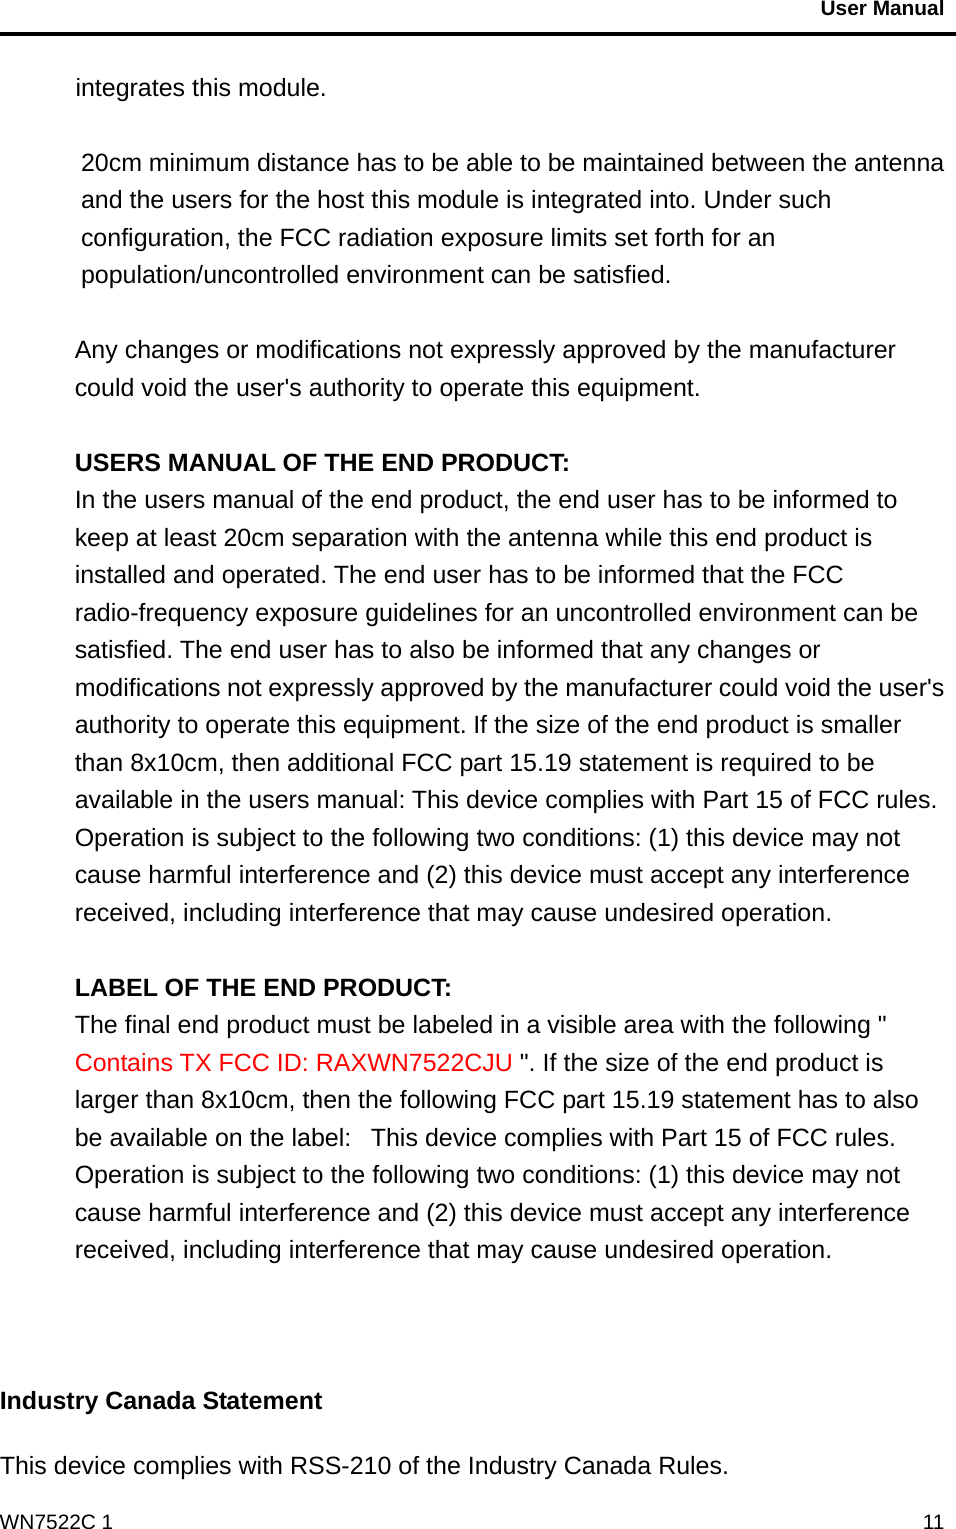                                           User Manual                                              WN7522C 1  11integrates this module.  20cm minimum distance has to be able to be maintained between the antenna and the users for the host this module is integrated into. Under such configuration, the FCC radiation exposure limits set forth for an population/uncontrolled environment can be satisfied.    Any changes or modifications not expressly approved by the manufacturer could void the user&apos;s authority to operate this equipment.  USERS MANUAL OF THE END PRODUCT: In the users manual of the end product, the end user has to be informed to keep at least 20cm separation with the antenna while this end product is installed and operated. The end user has to be informed that the FCC radio-frequency exposure guidelines for an uncontrolled environment can be satisfied. The end user has to also be informed that any changes or modifications not expressly approved by the manufacturer could void the user&apos;s authority to operate this equipment. If the size of the end product is smaller than 8x10cm, then additional FCC part 15.19 statement is required to be available in the users manual: This device complies with Part 15 of FCC rules. Operation is subject to the following two conditions: (1) this device may not cause harmful interference and (2) this device must accept any interference received, including interference that may cause undesired operation.  LABEL OF THE END PRODUCT: The final end product must be labeled in a visible area with the following &quot; Contains TX FCC ID: RAXWN7522CJU &quot;. If the size of the end product is larger than 8x10cm, then the following FCC part 15.19 statement has to also be available on the label:   This device complies with Part 15 of FCC rules. Operation is subject to the following two conditions: (1) this device may not cause harmful interference and (2) this device must accept any interference received, including interference that may cause undesired operation.    Industry Canada Statement  This device complies with RSS-210 of the Industry Canada Rules.   